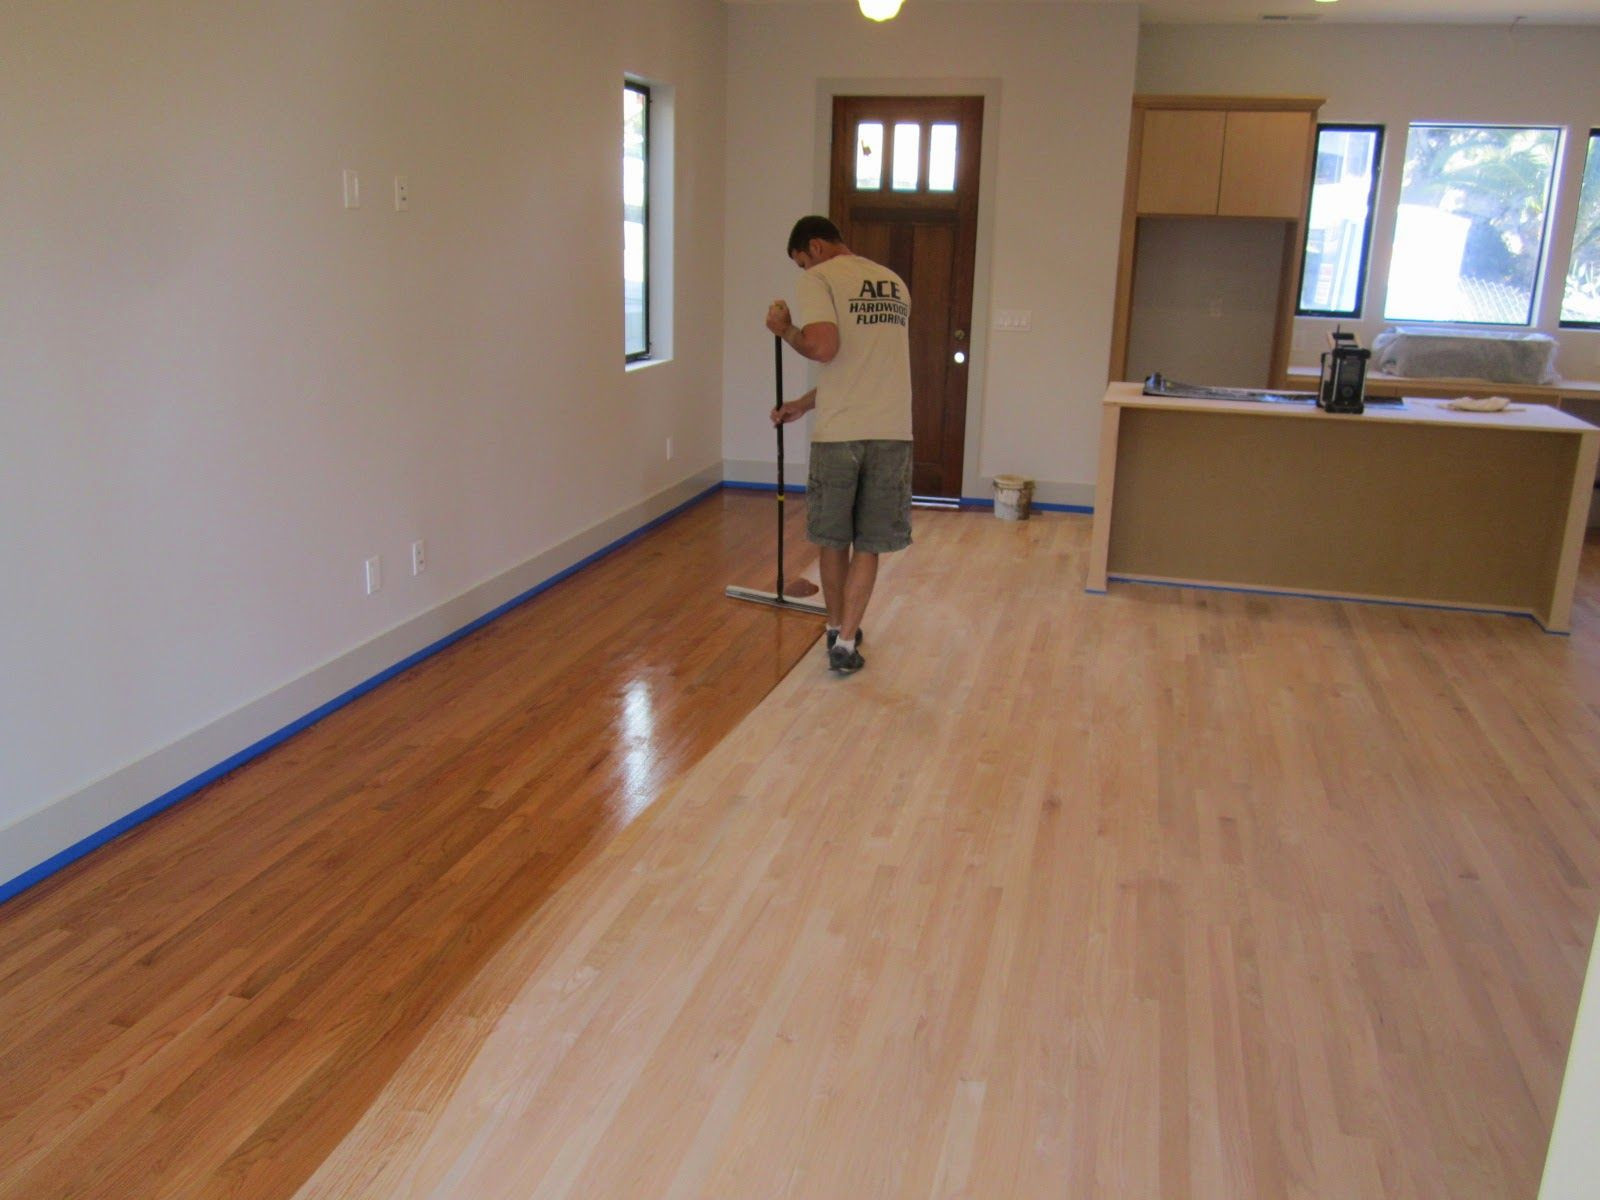 30 attractive Hardwood Floor Refinishing Portland Cost 2024 free download hardwood floor refinishing portland cost of how much to refinish wood floors adventures in staining my red oak within how much to refinish wood floors do you have a wooden floor that looks v